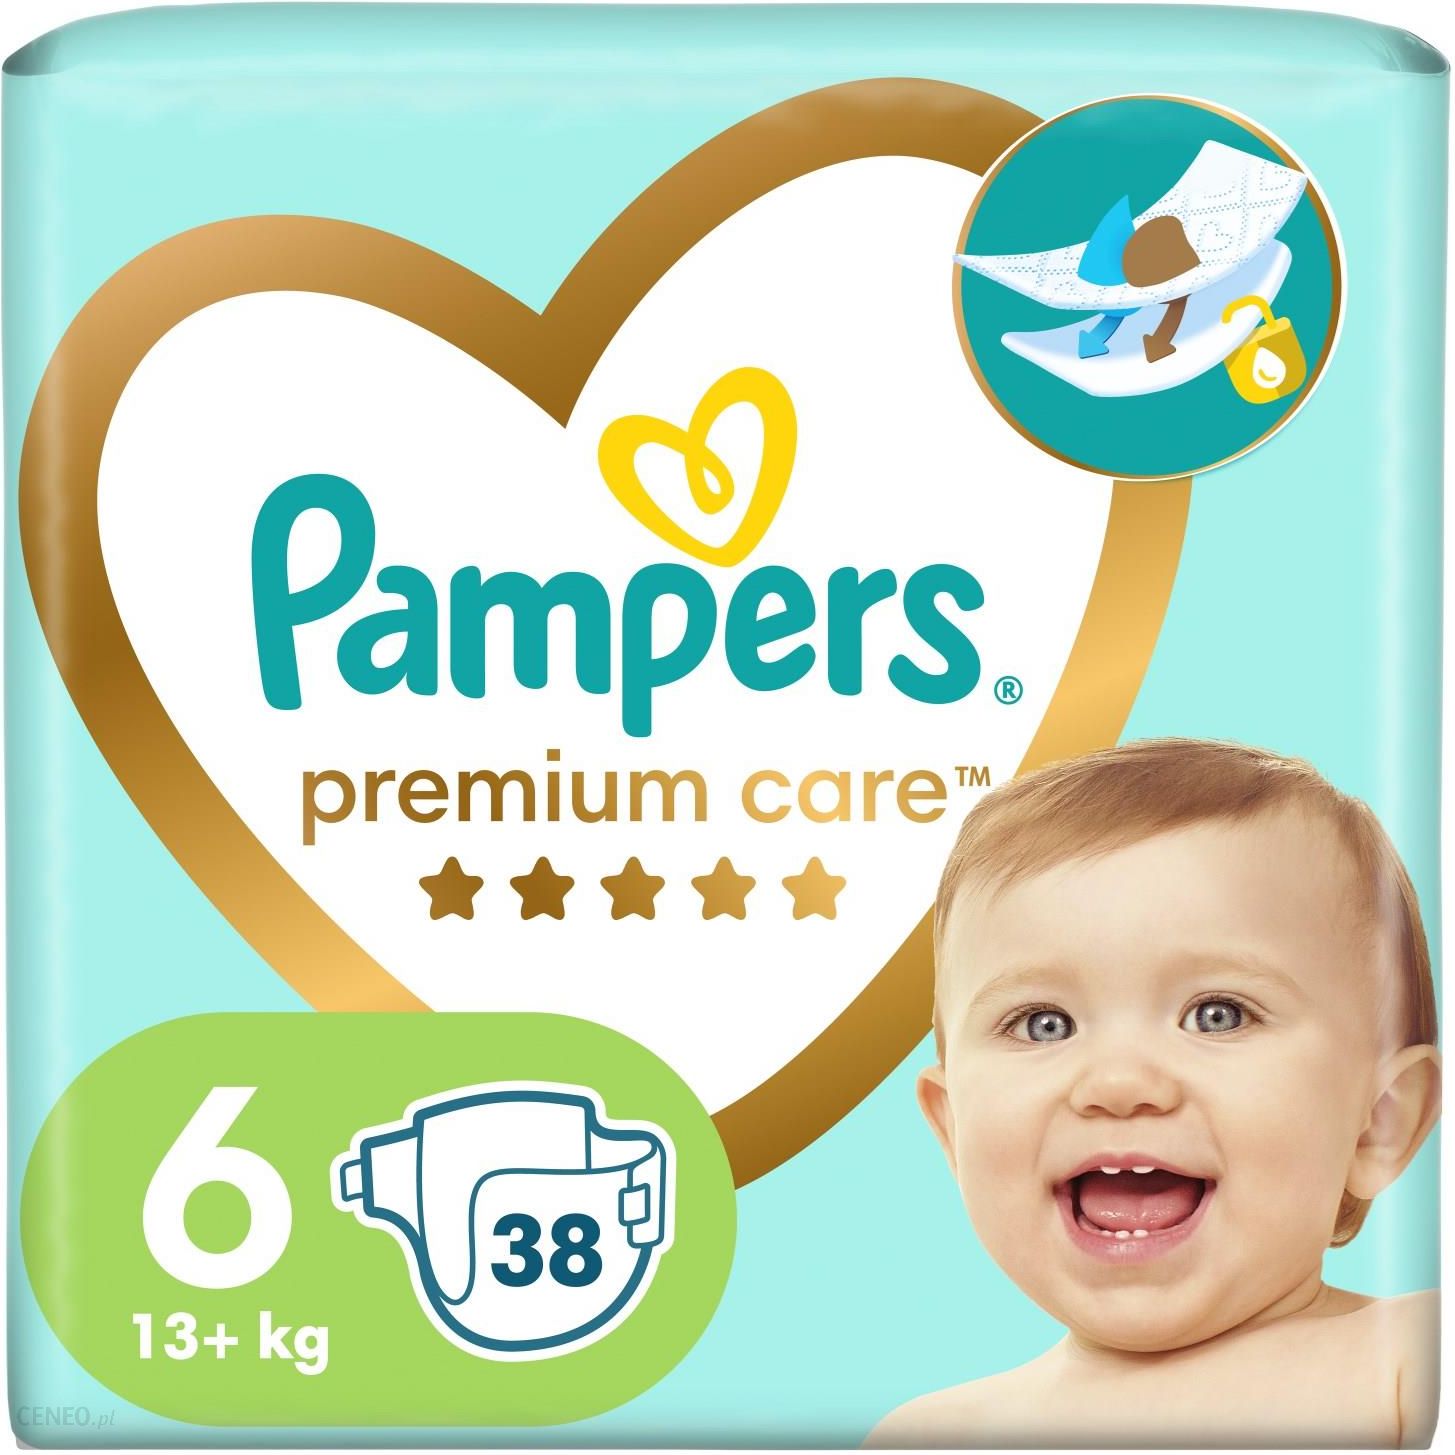 mg2450 pampers